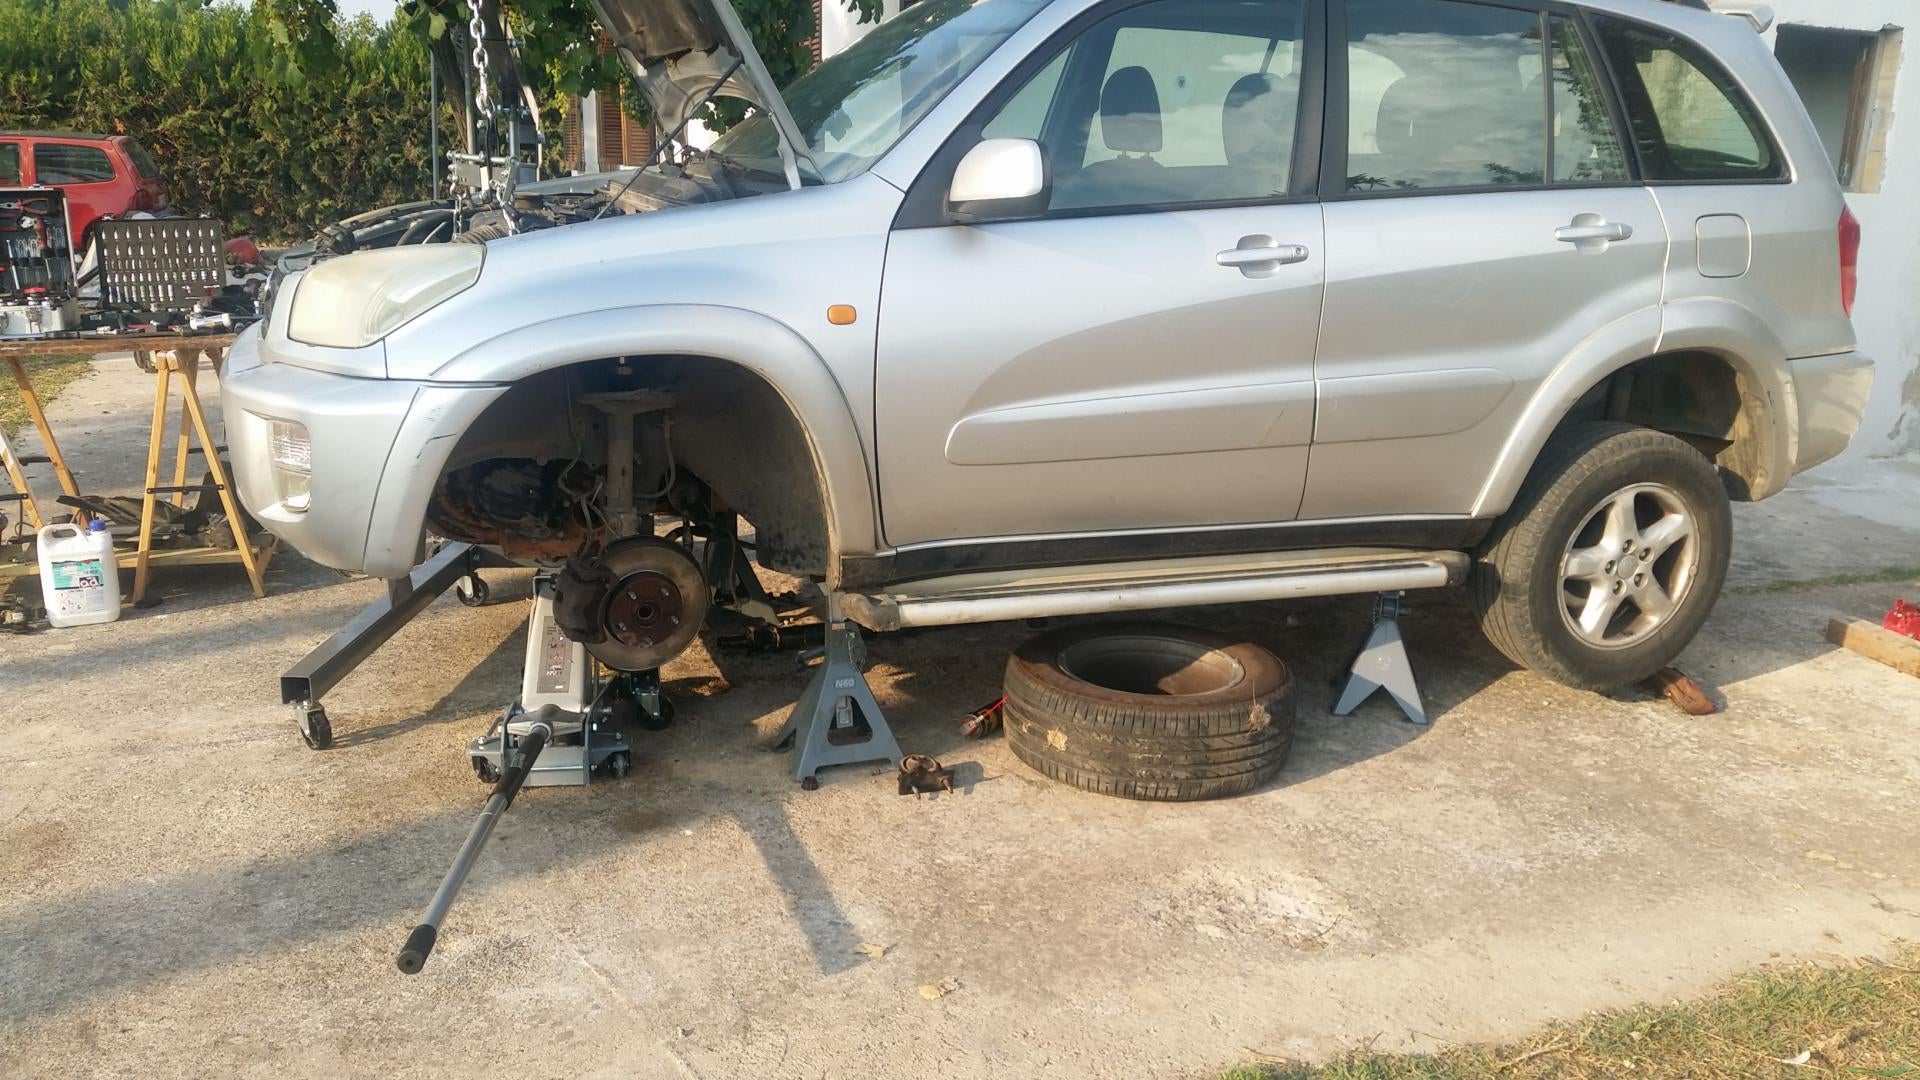 Price of clutch replacement | Toyota RAV4 Forums